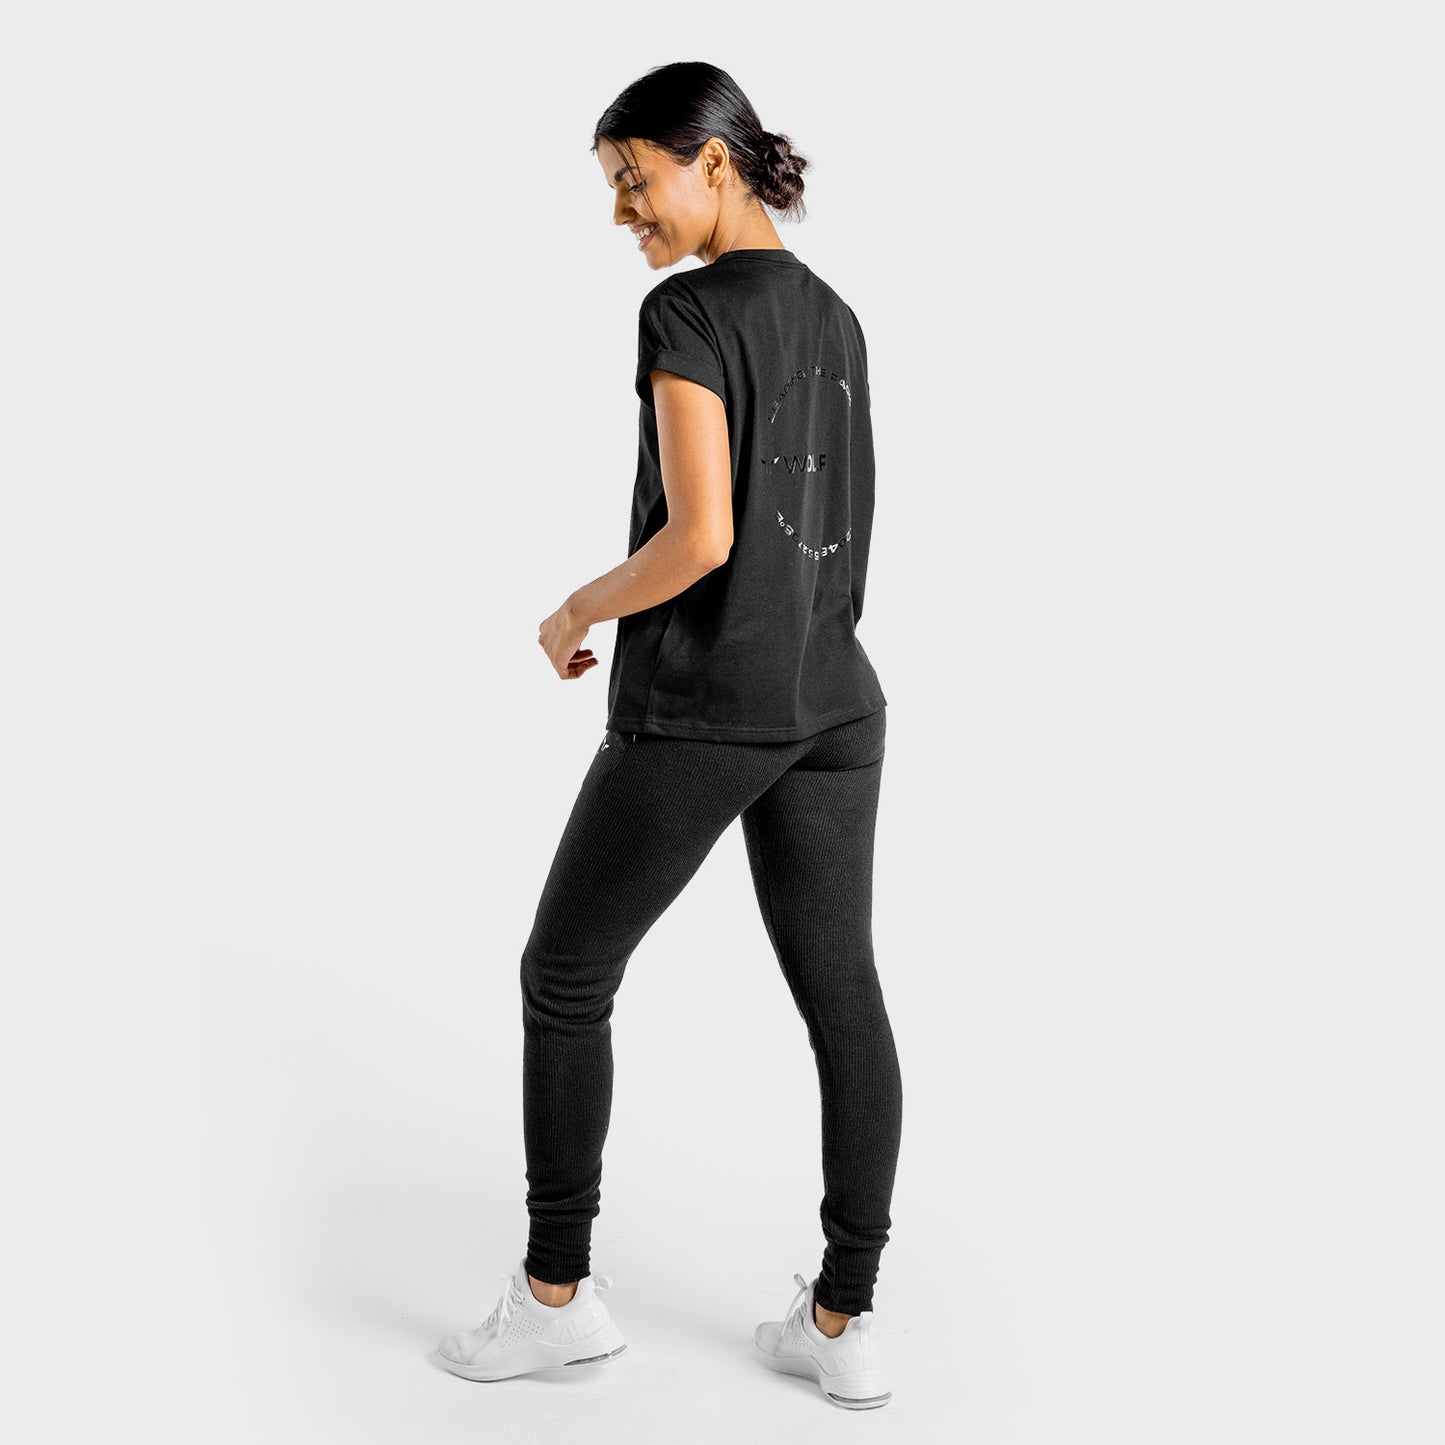 squatwolf-gym-t-shirts-for-women-luxe-oversize-tee-black-workout-clothes